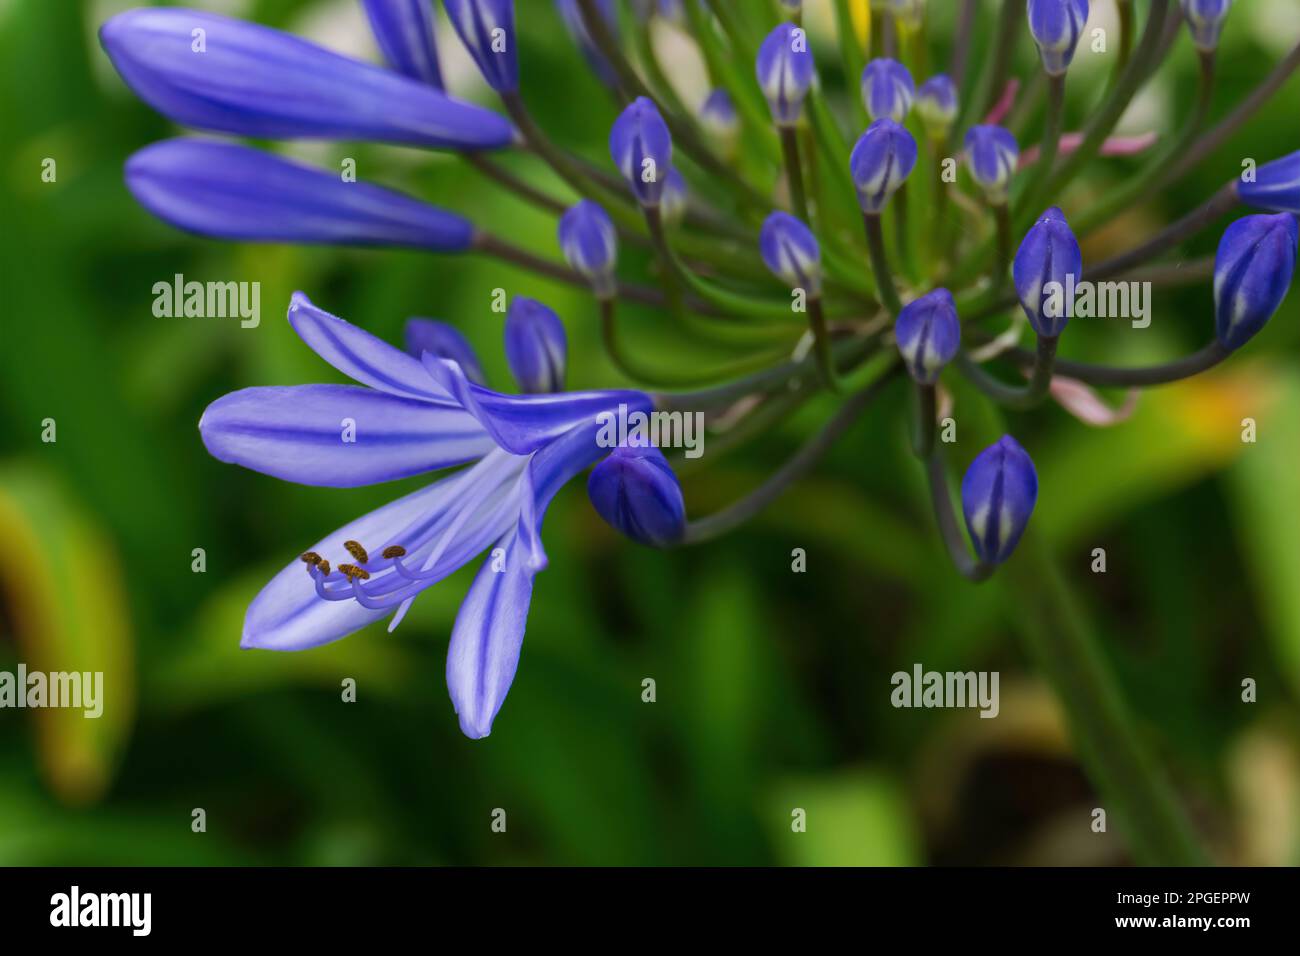 Lilac inflorescences of African Agapanthus in the garden close up Stock Photo